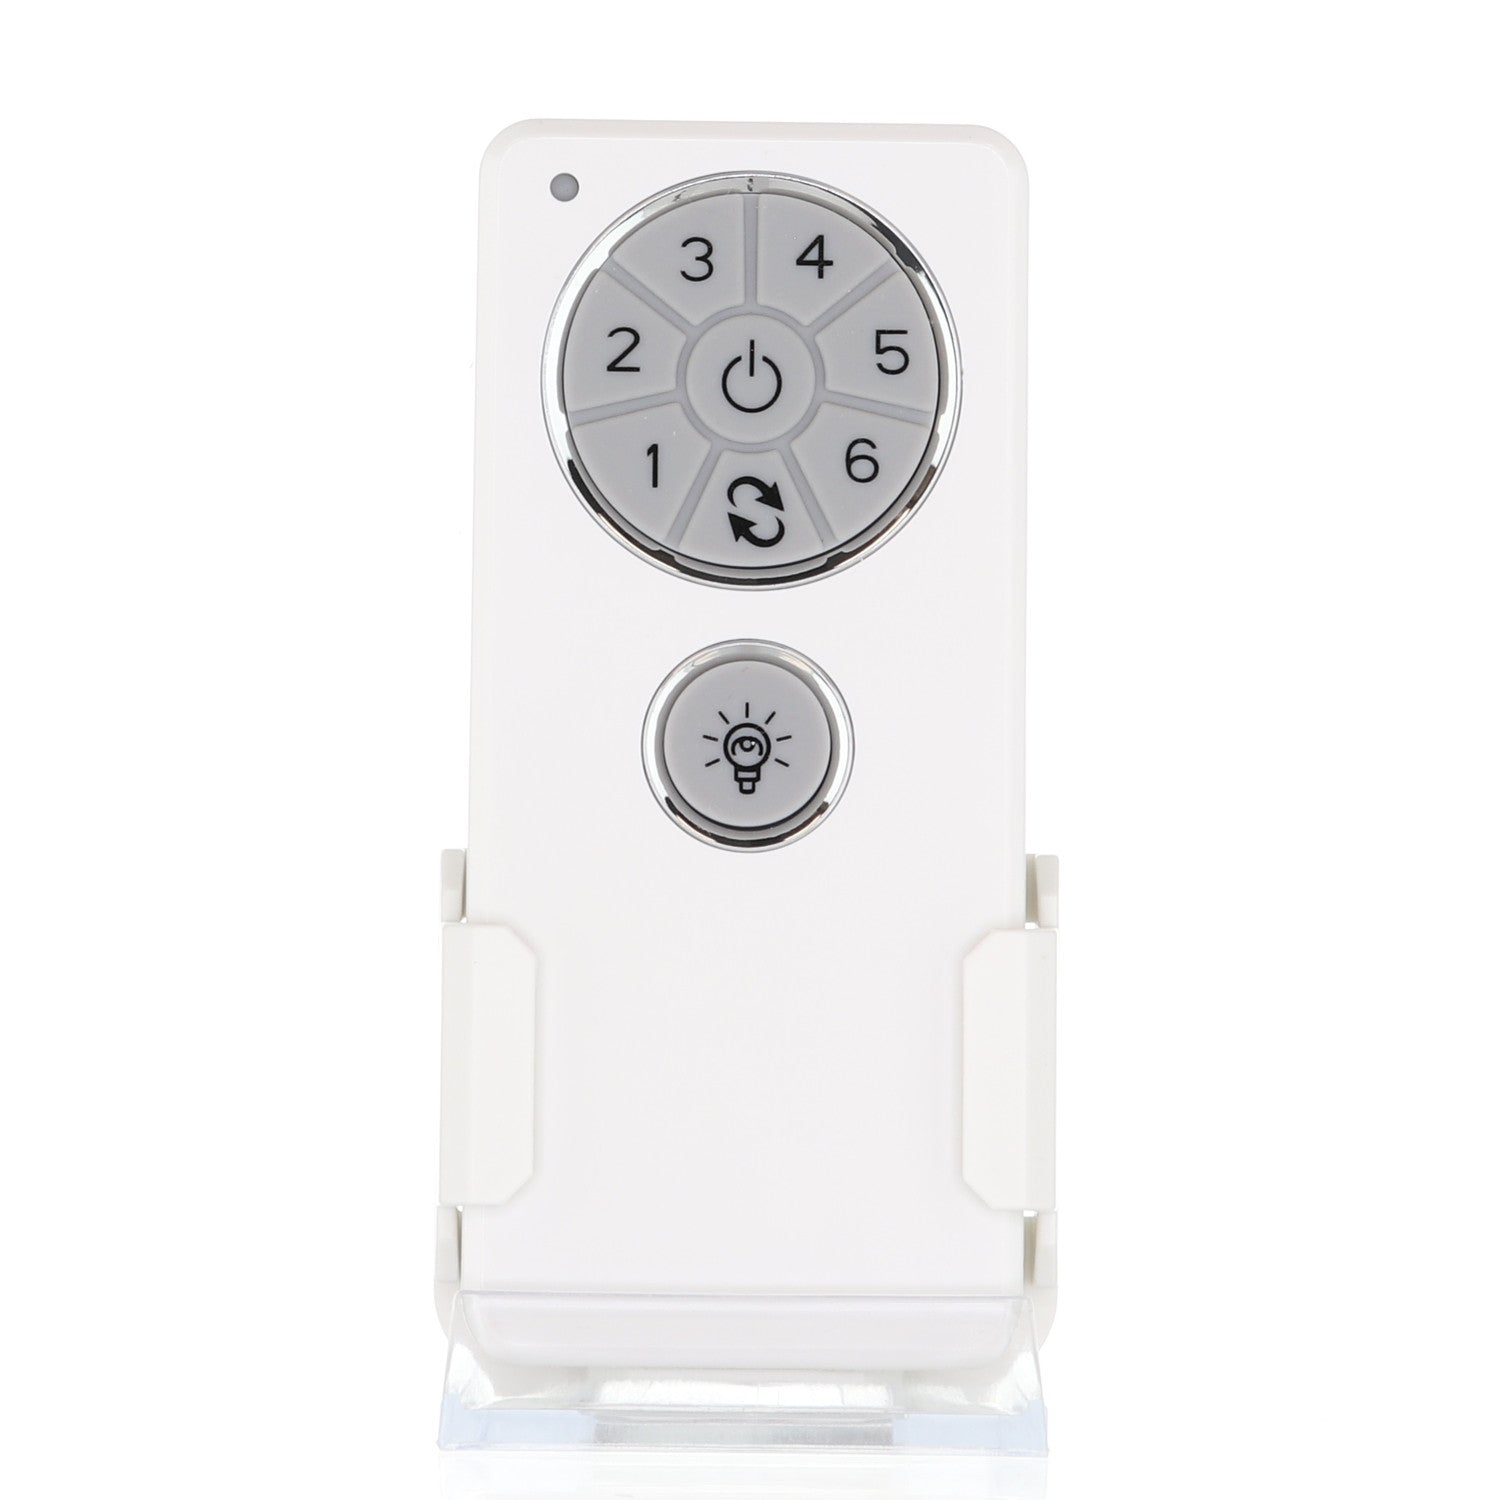 DC1 Remote Control with 6 Speeds for Hampton Bay® and Monte Carlo® Ceiling Fans